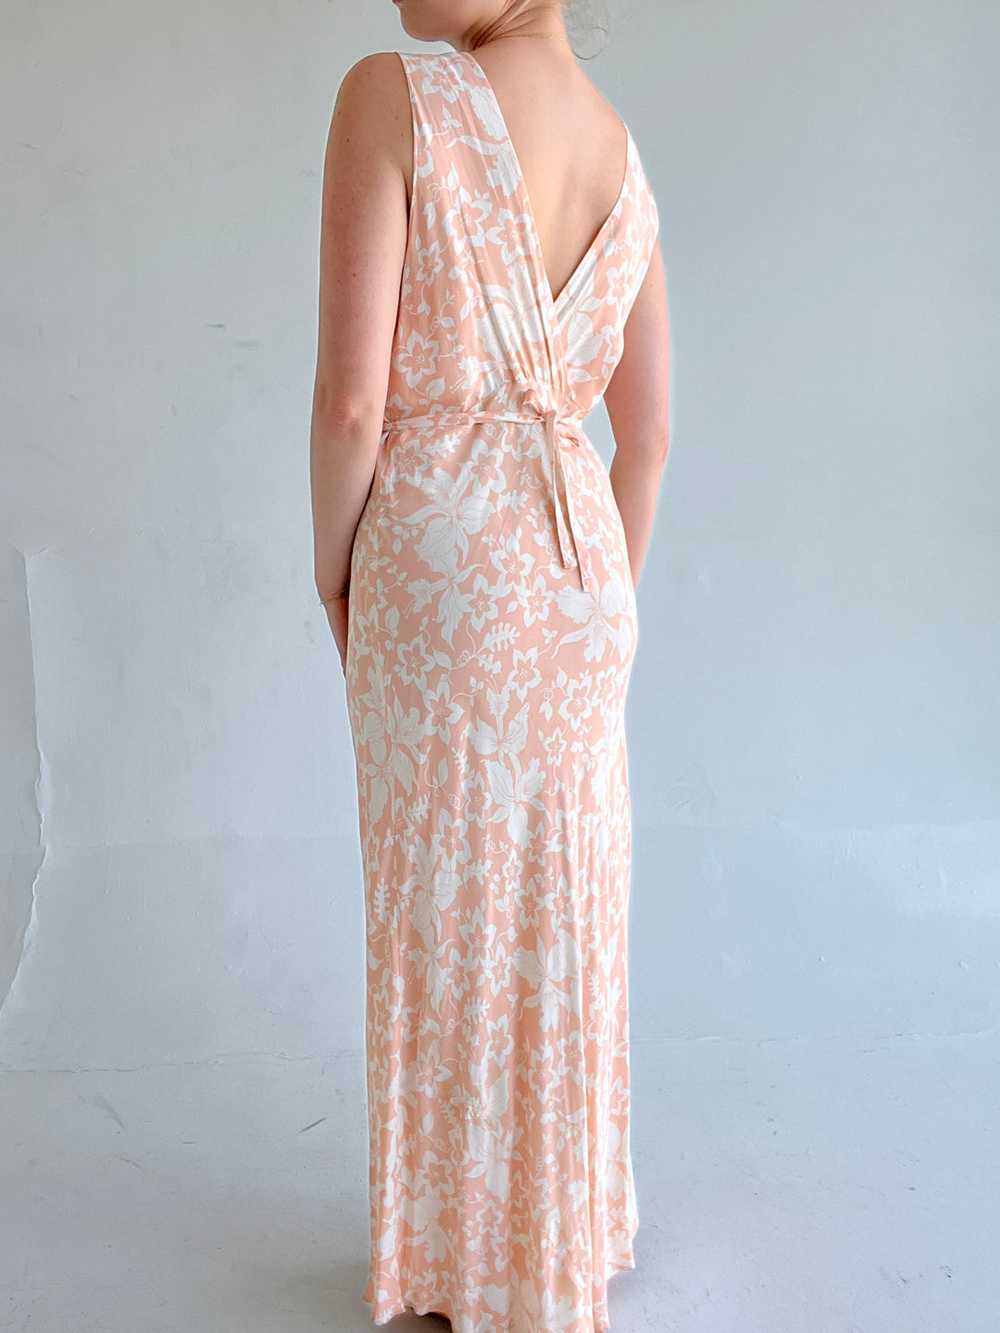 1940's Peach and White Floral Slip - image 5